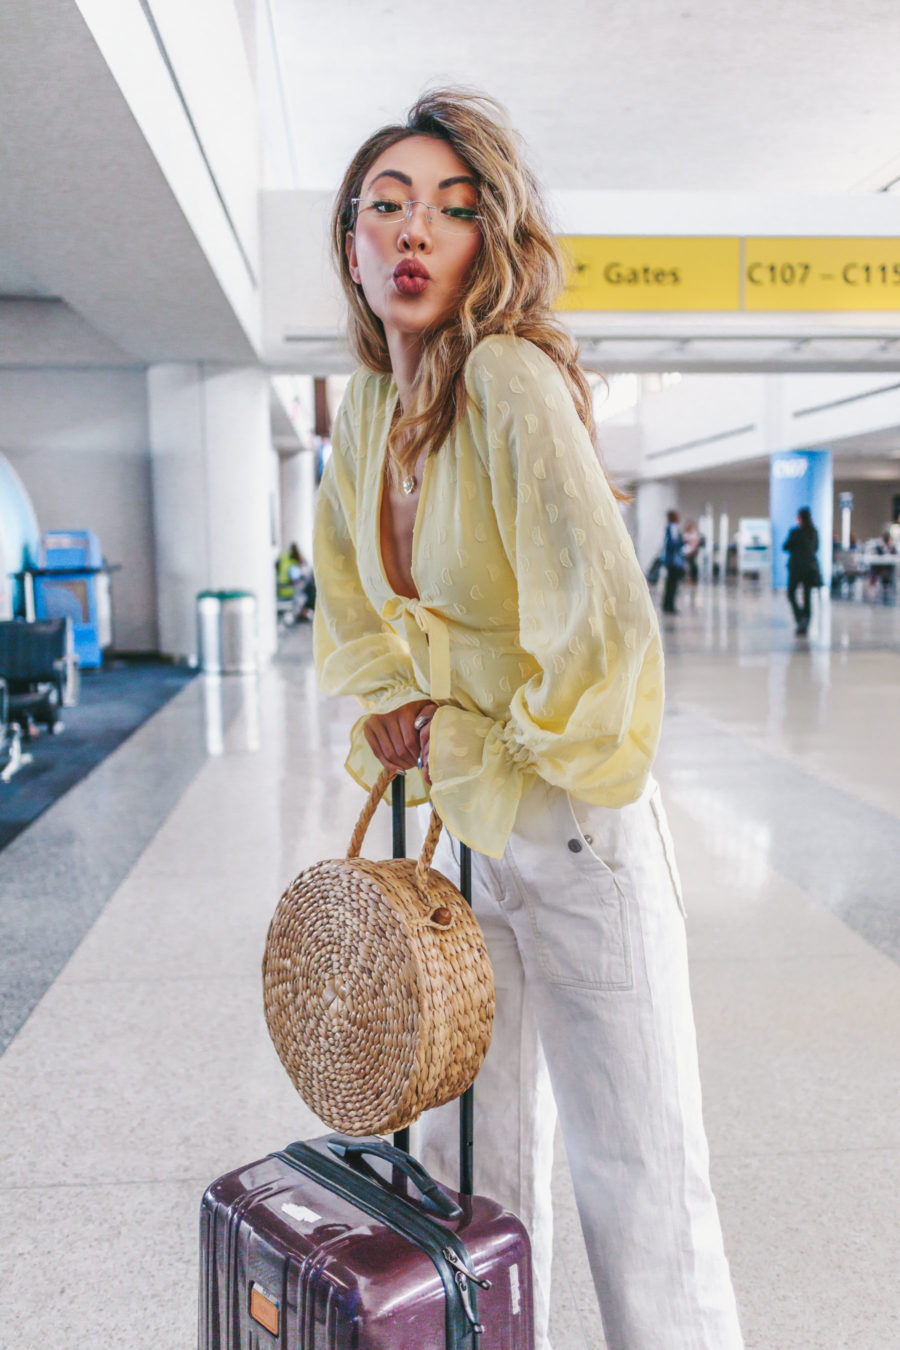 jessica wang wearing a yellow keyhole blouse with white jeans at the airport while sharing her travel essential items // Jessica Wang - Notjessfashion.com